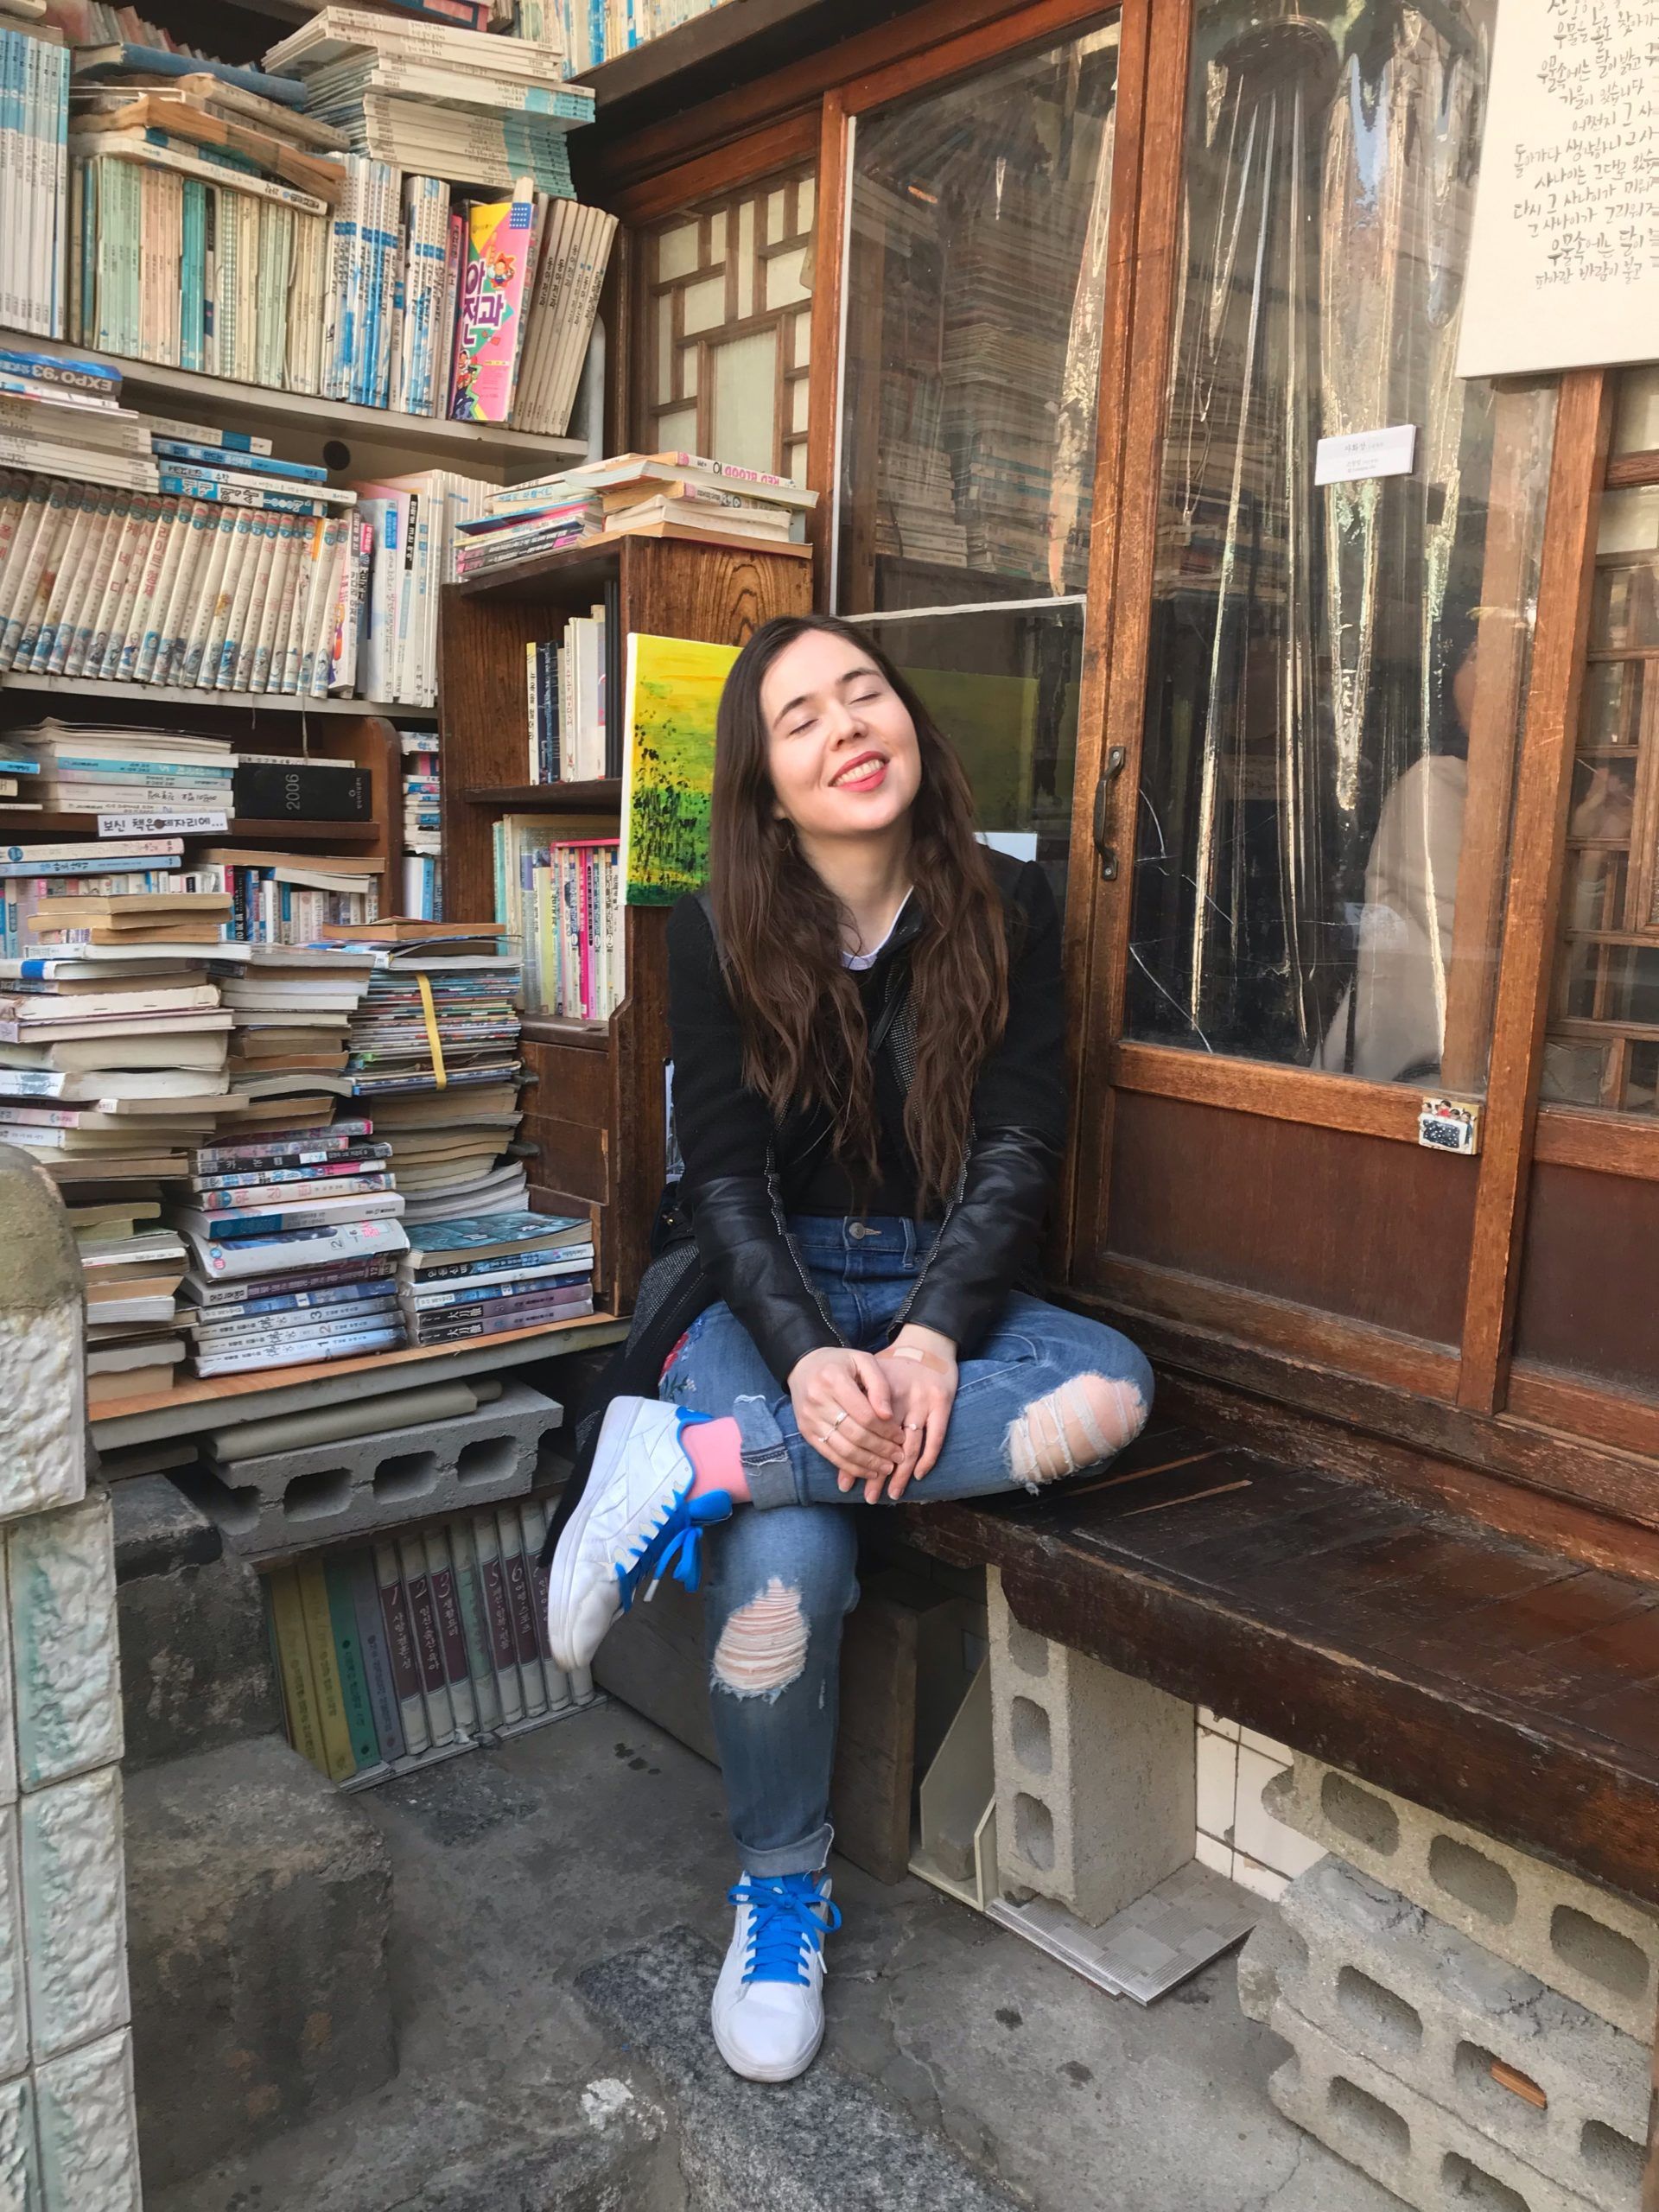 Image of article writer at Daeo bookstore in Seoul. Photo credit: Gianessa Refermat